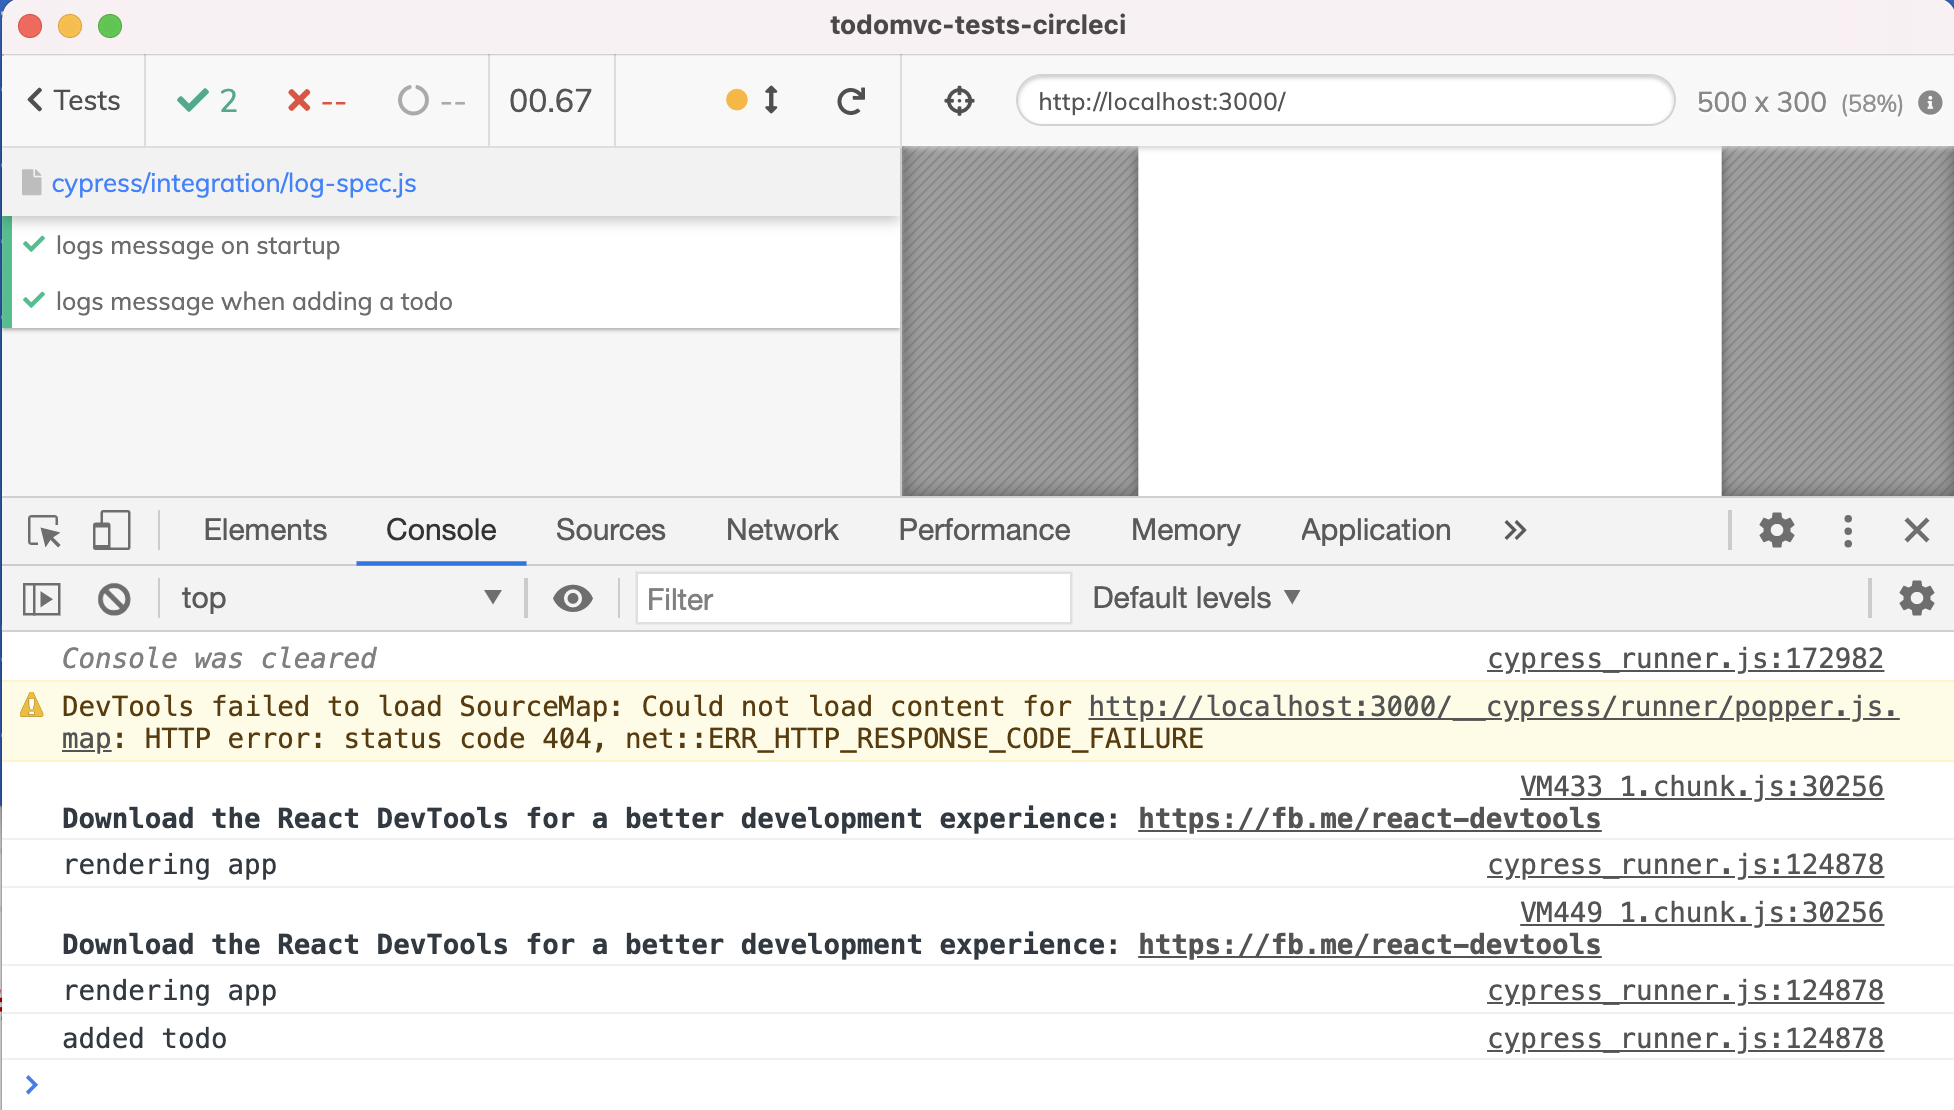 The DevTools console never shows the message "running app code" from the app callback